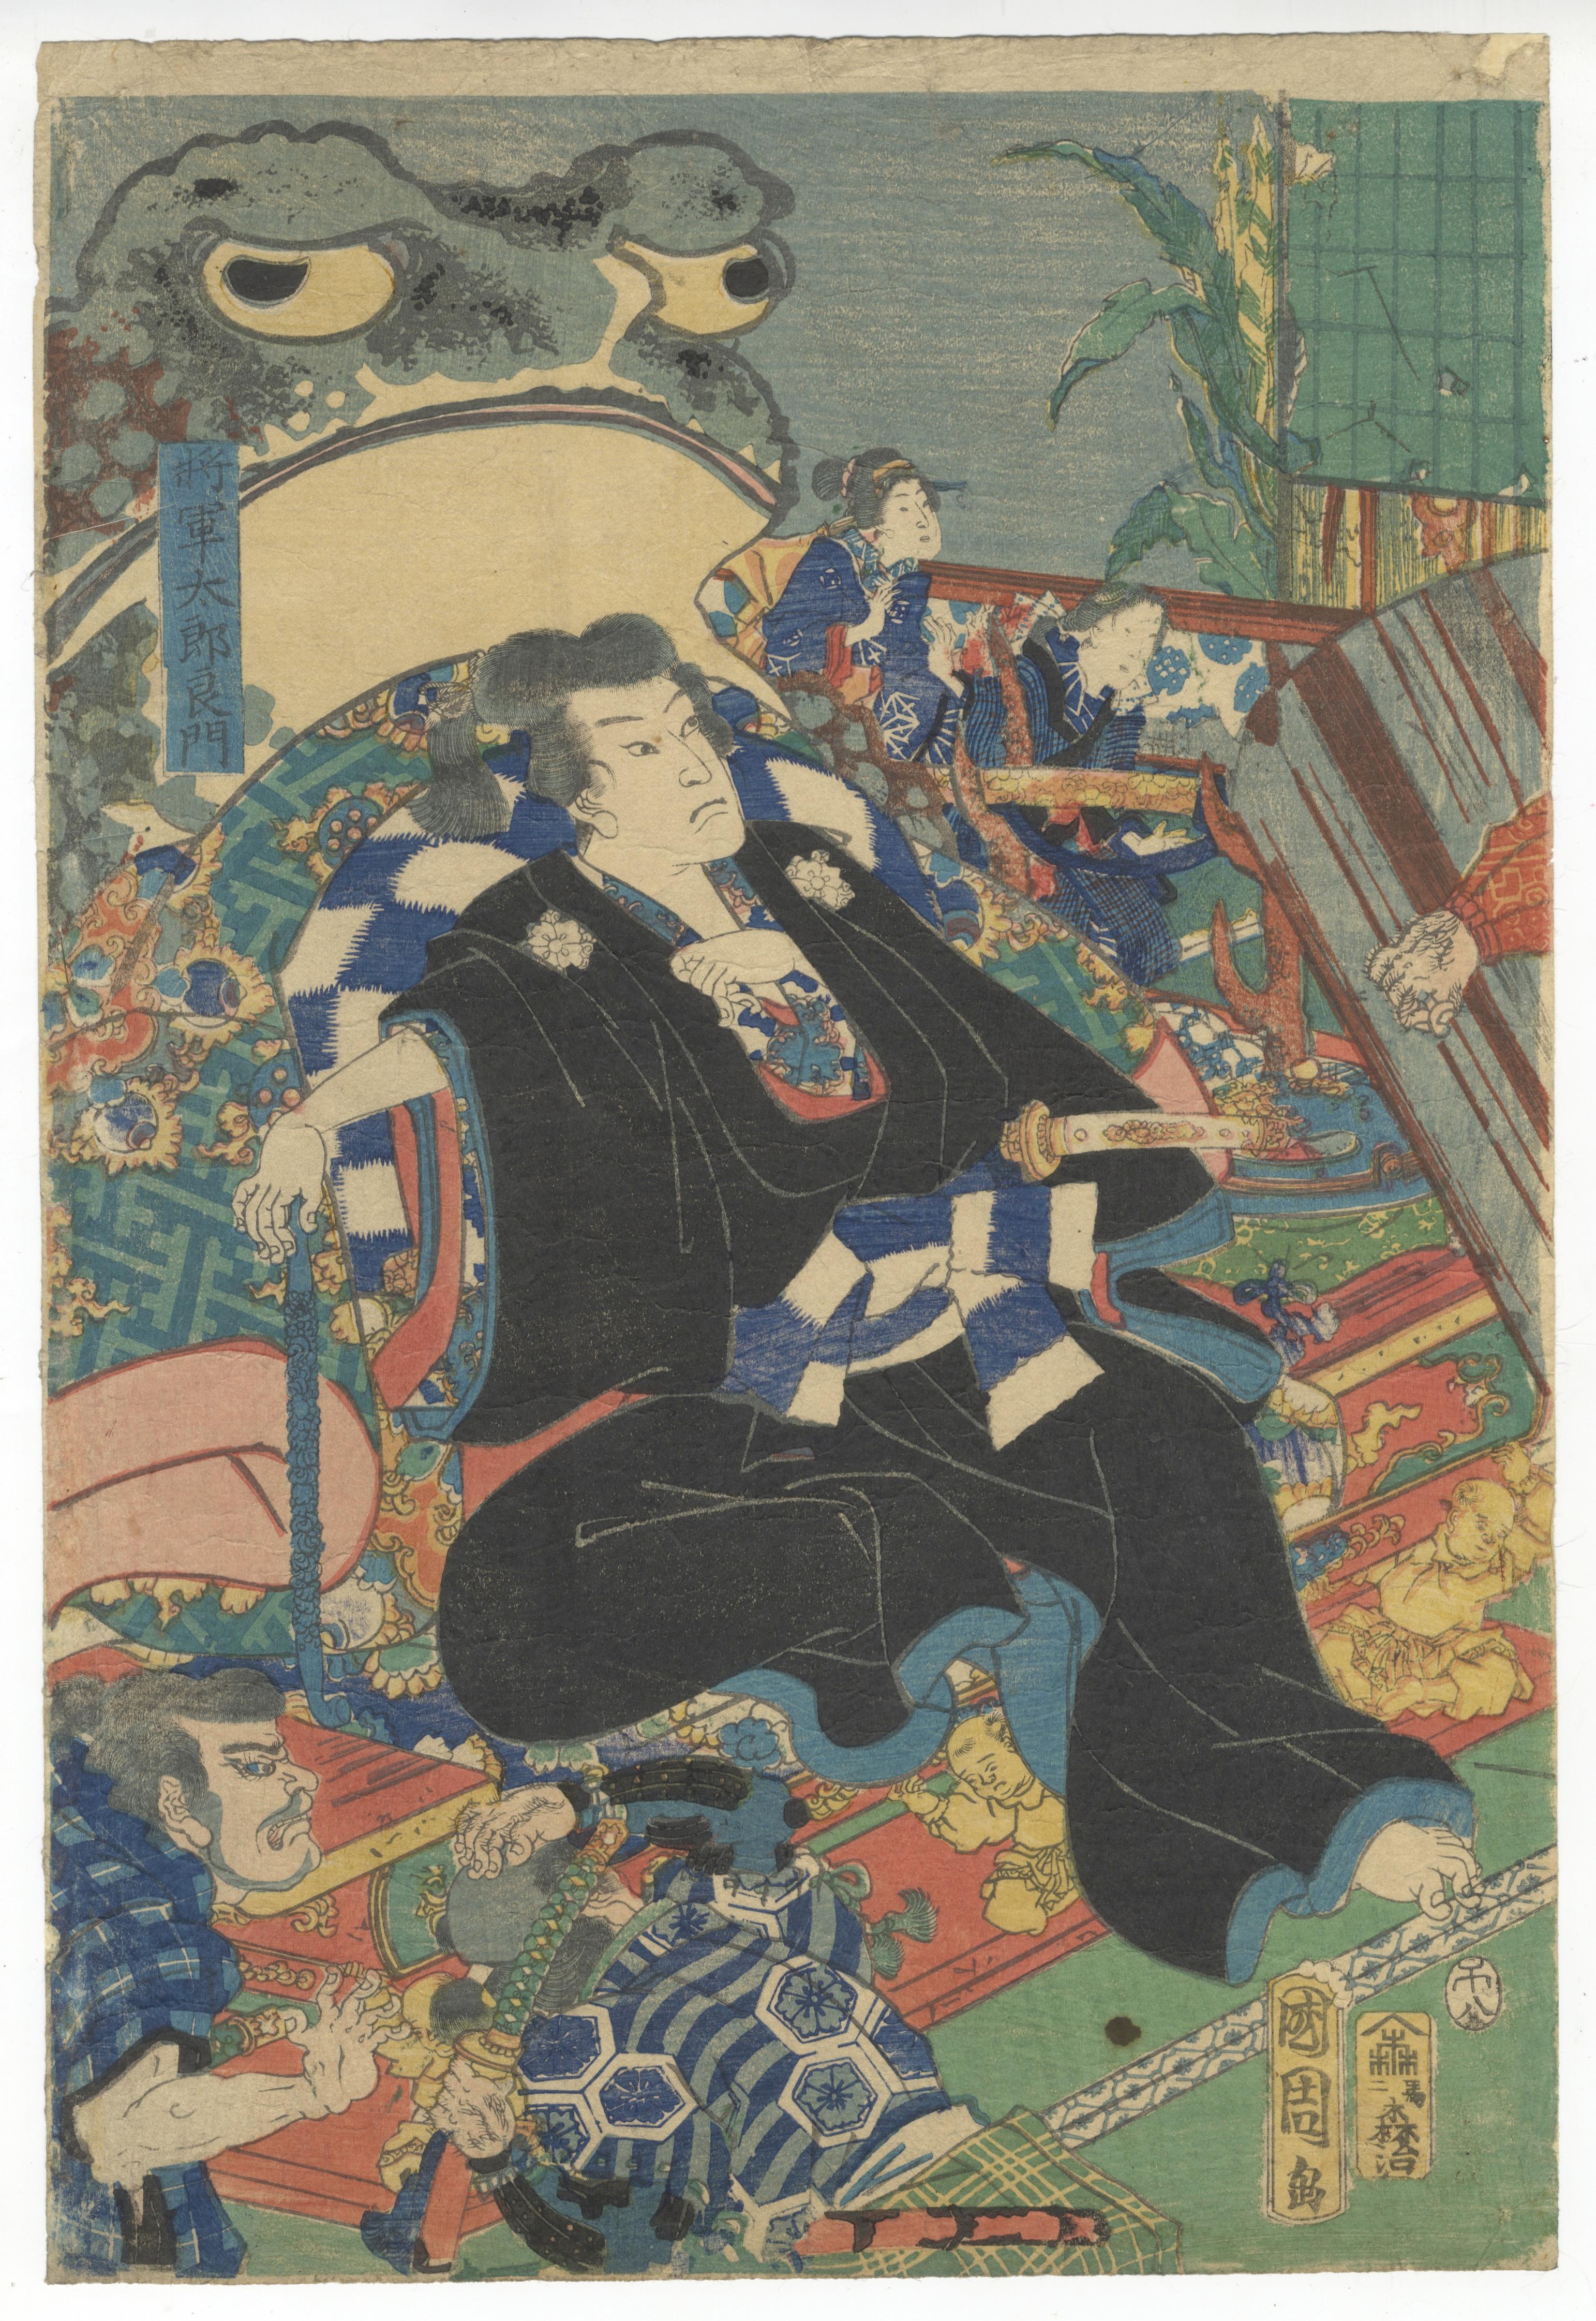 Artist: Kunichika Toyohara (1835-1900)
Title: The Picture of Soma no Yoshikado in the Old Temple
Publisher: Moriya Jihei
Date: 1858
Dimensions: R (36.7 x 25) C (36.8 x 25) L (36.7 x 24.8) cm 

Takiyasha Hime is the surviving daughter of Taira